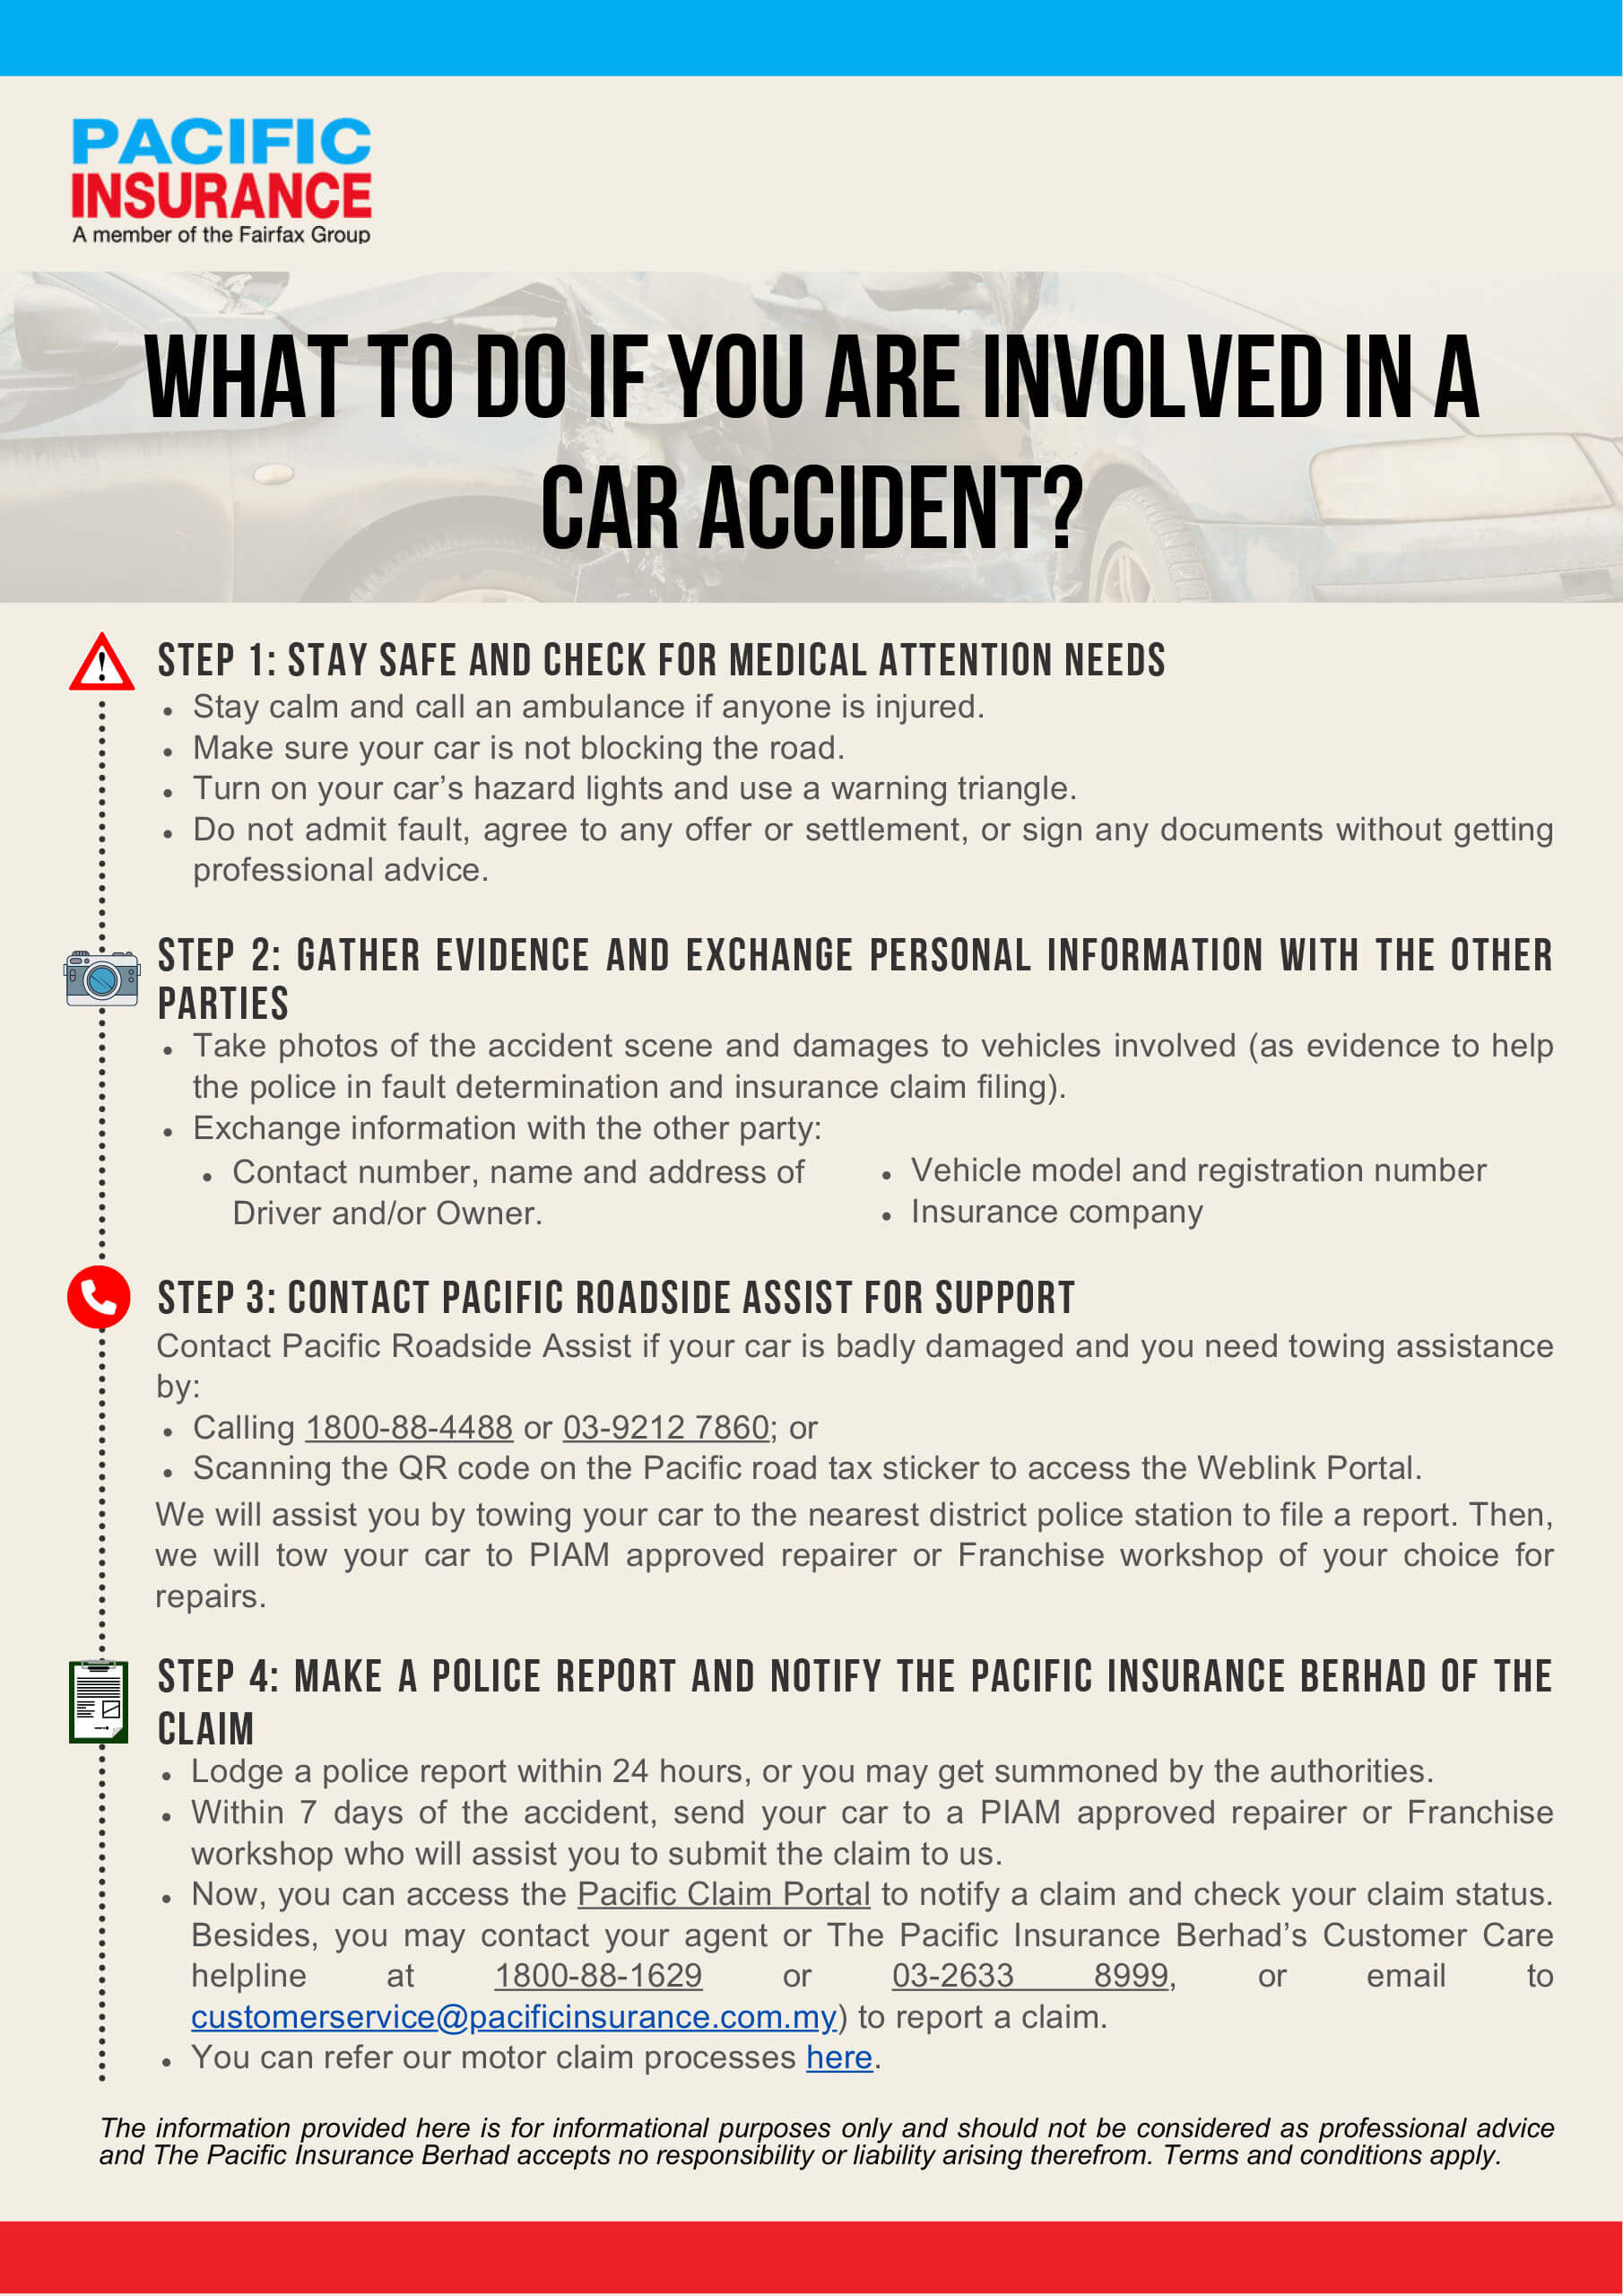 What to Do if You Are Involved in A Car Accident?